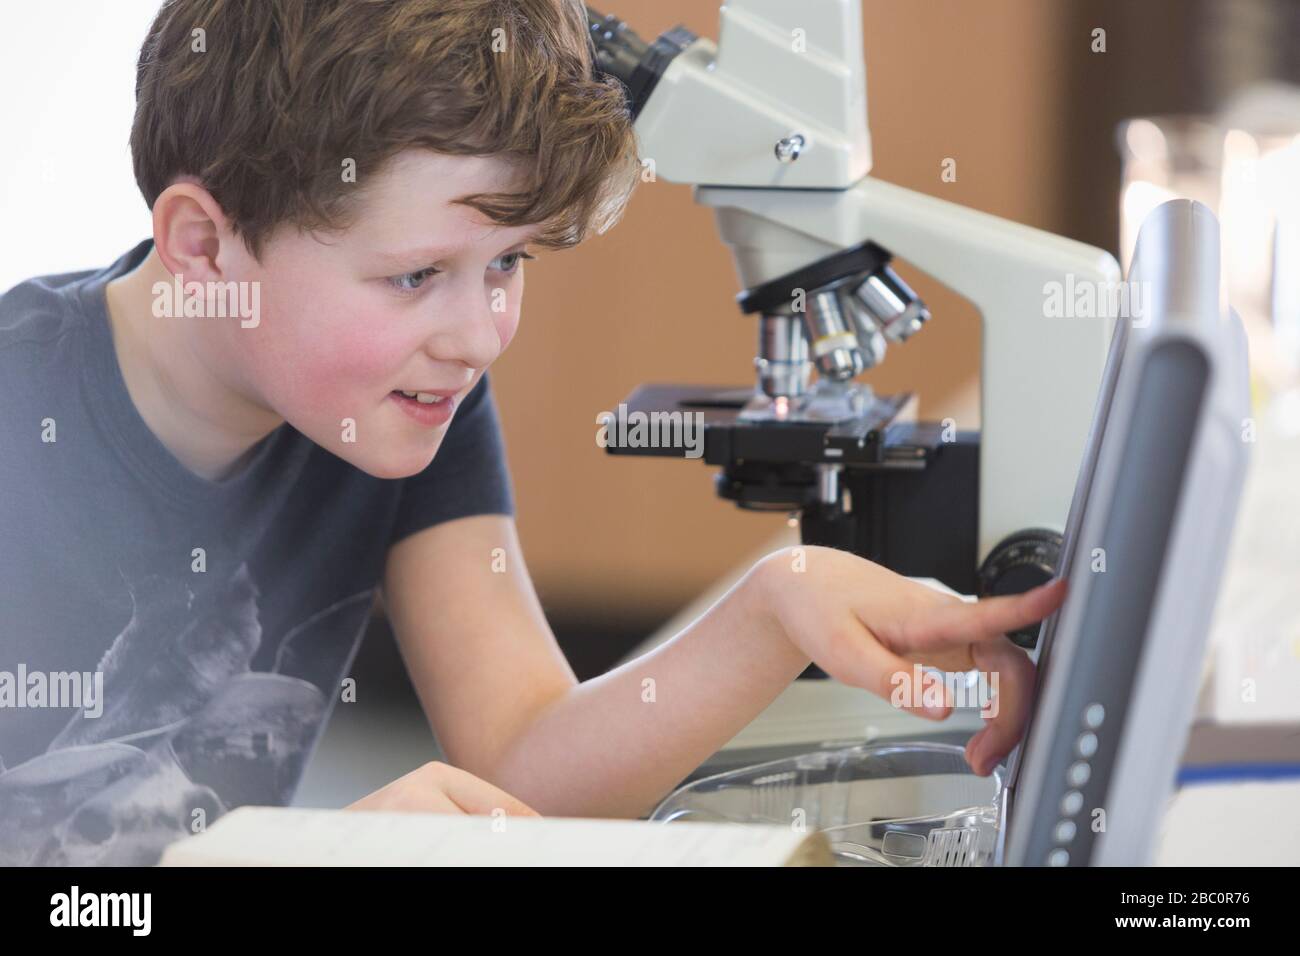 Boy student conducting scientific experiment at microscope and computer in laboratory classroom Stock Photo